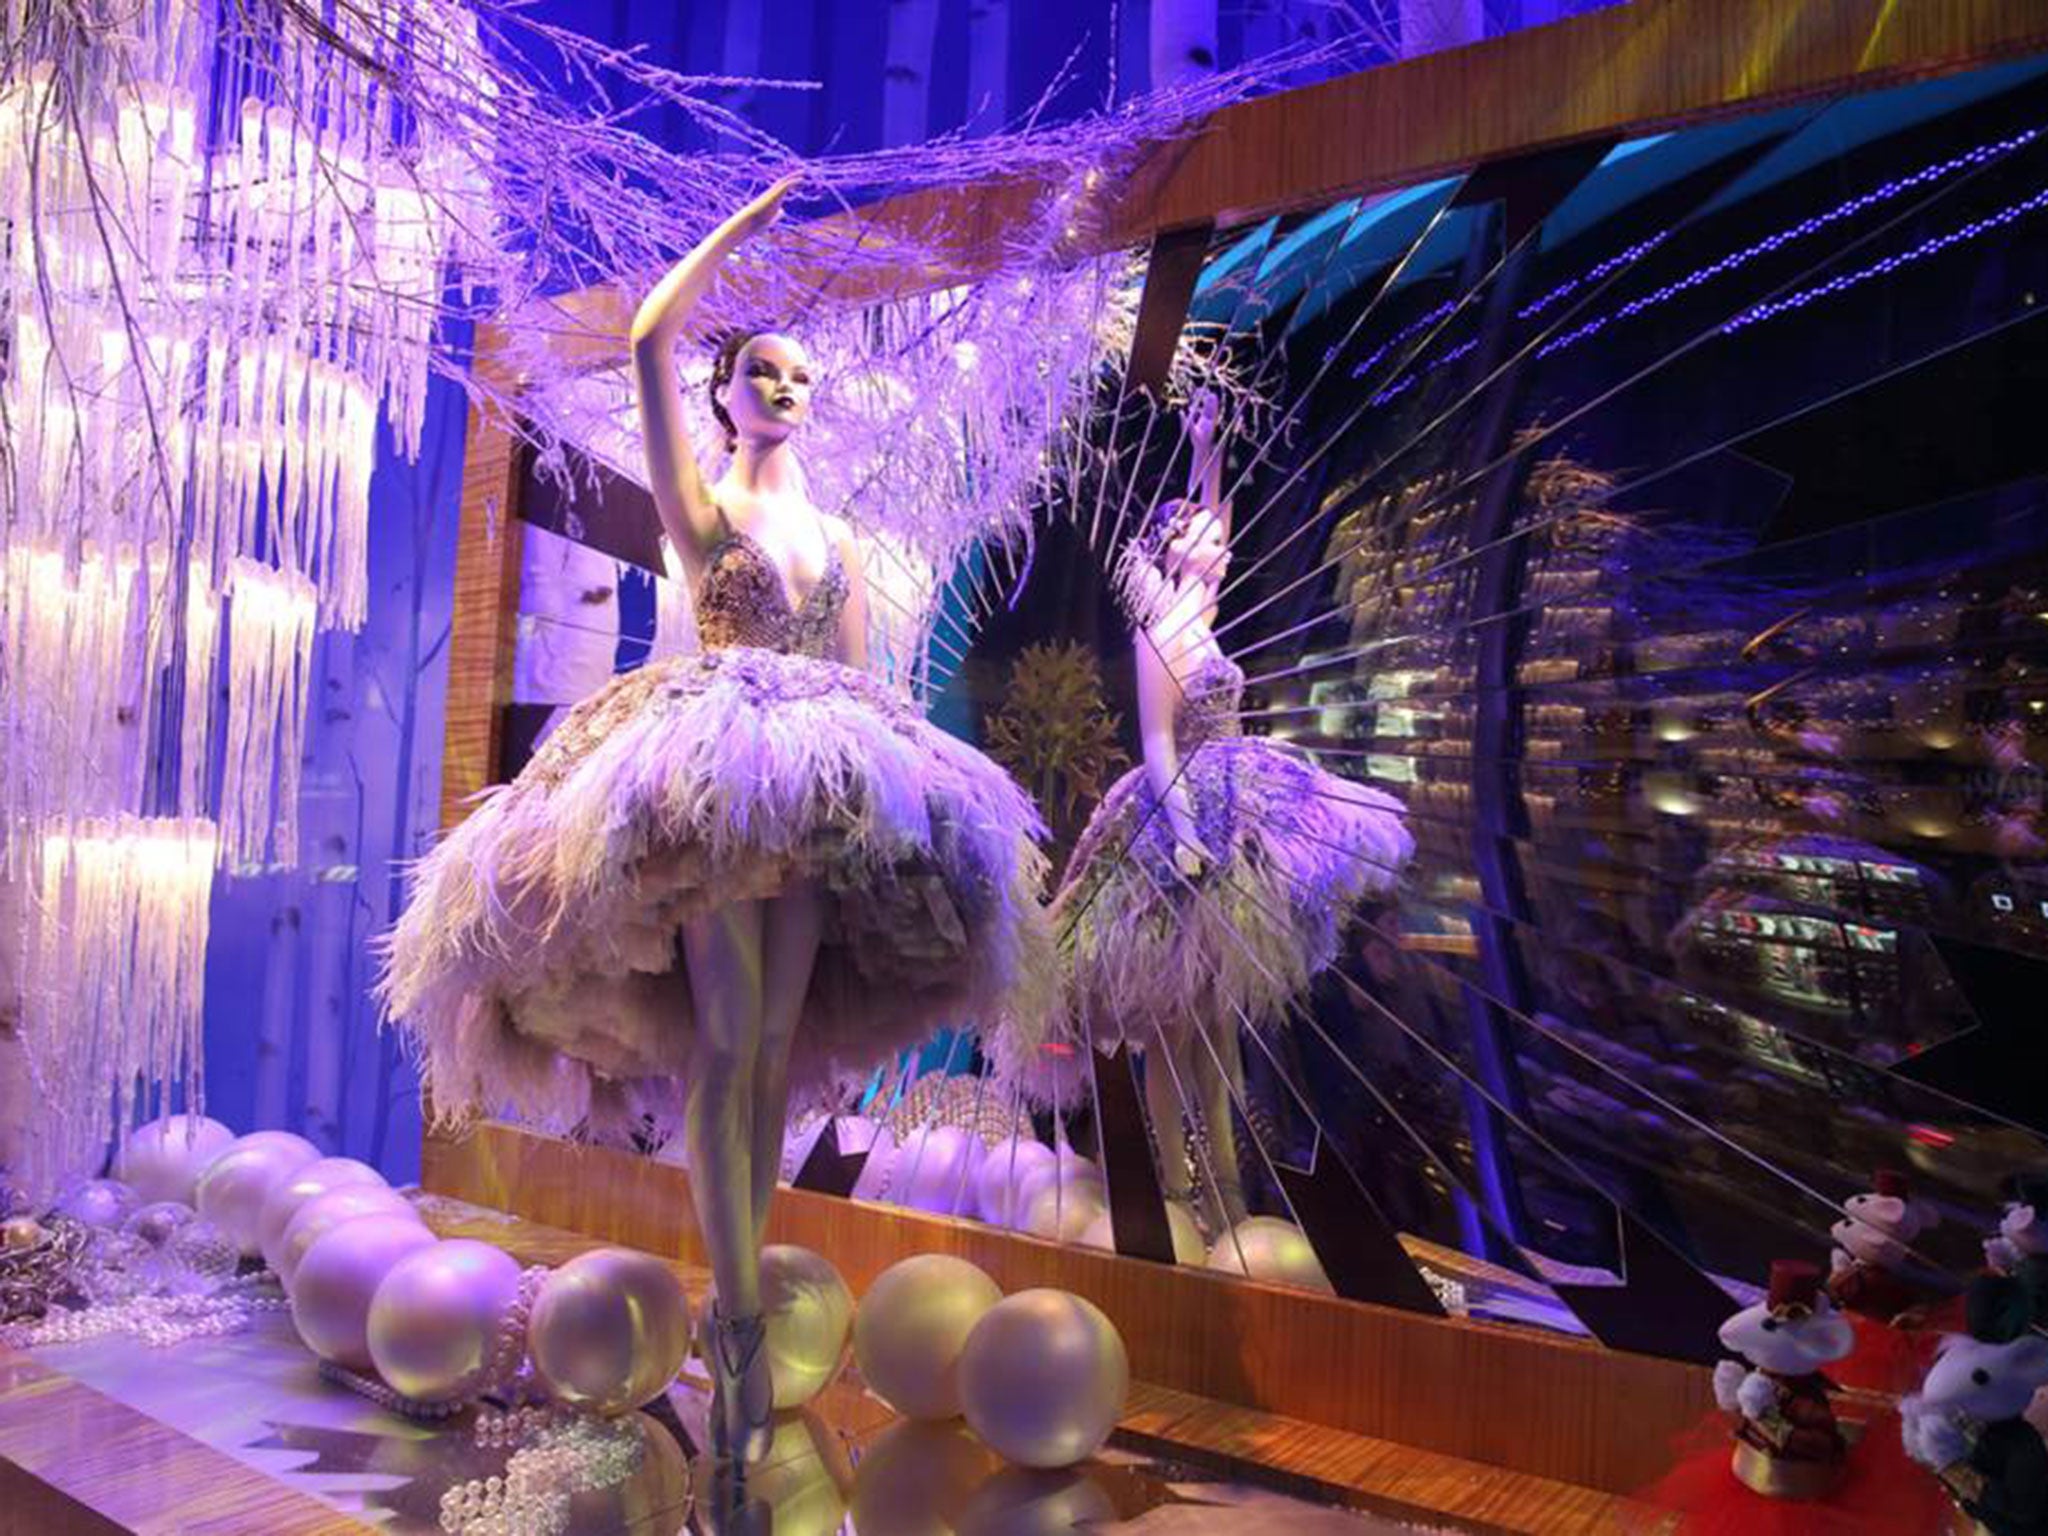 Harrods launches Christmas window displays and first animated festive